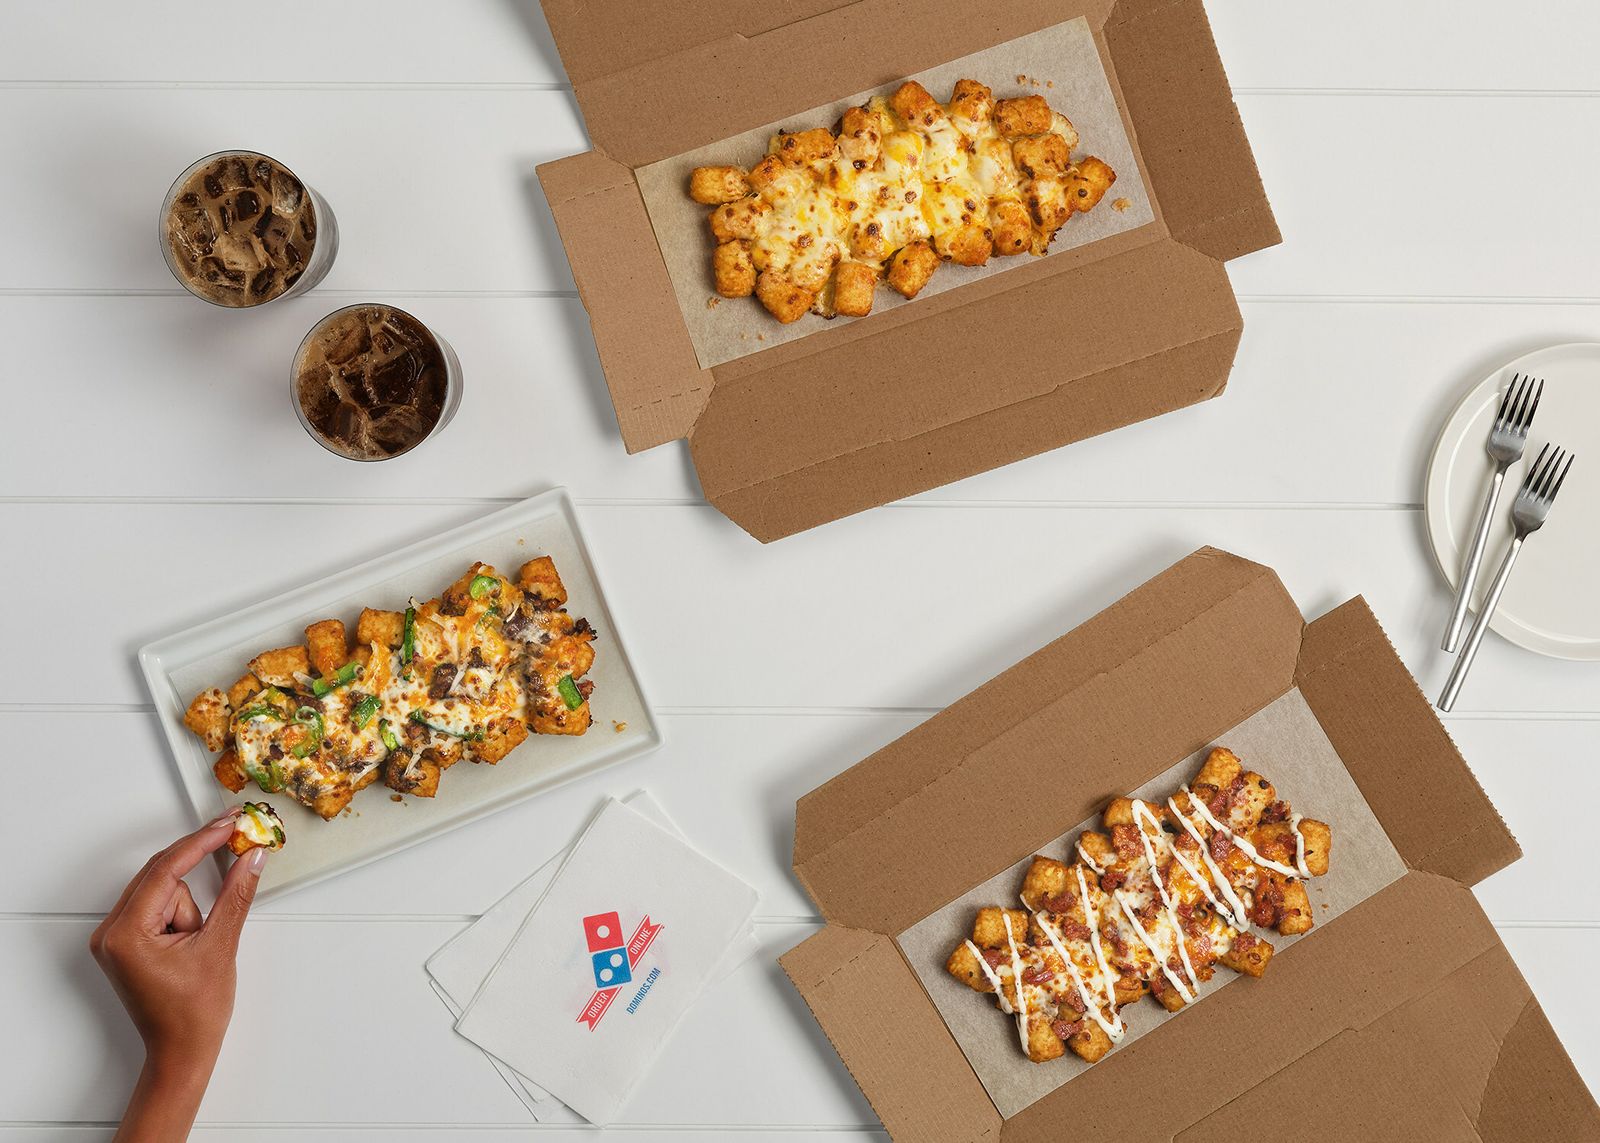 Domino's New Loaded Tots: They're Coming in Hot, Just in Time for the Big Game